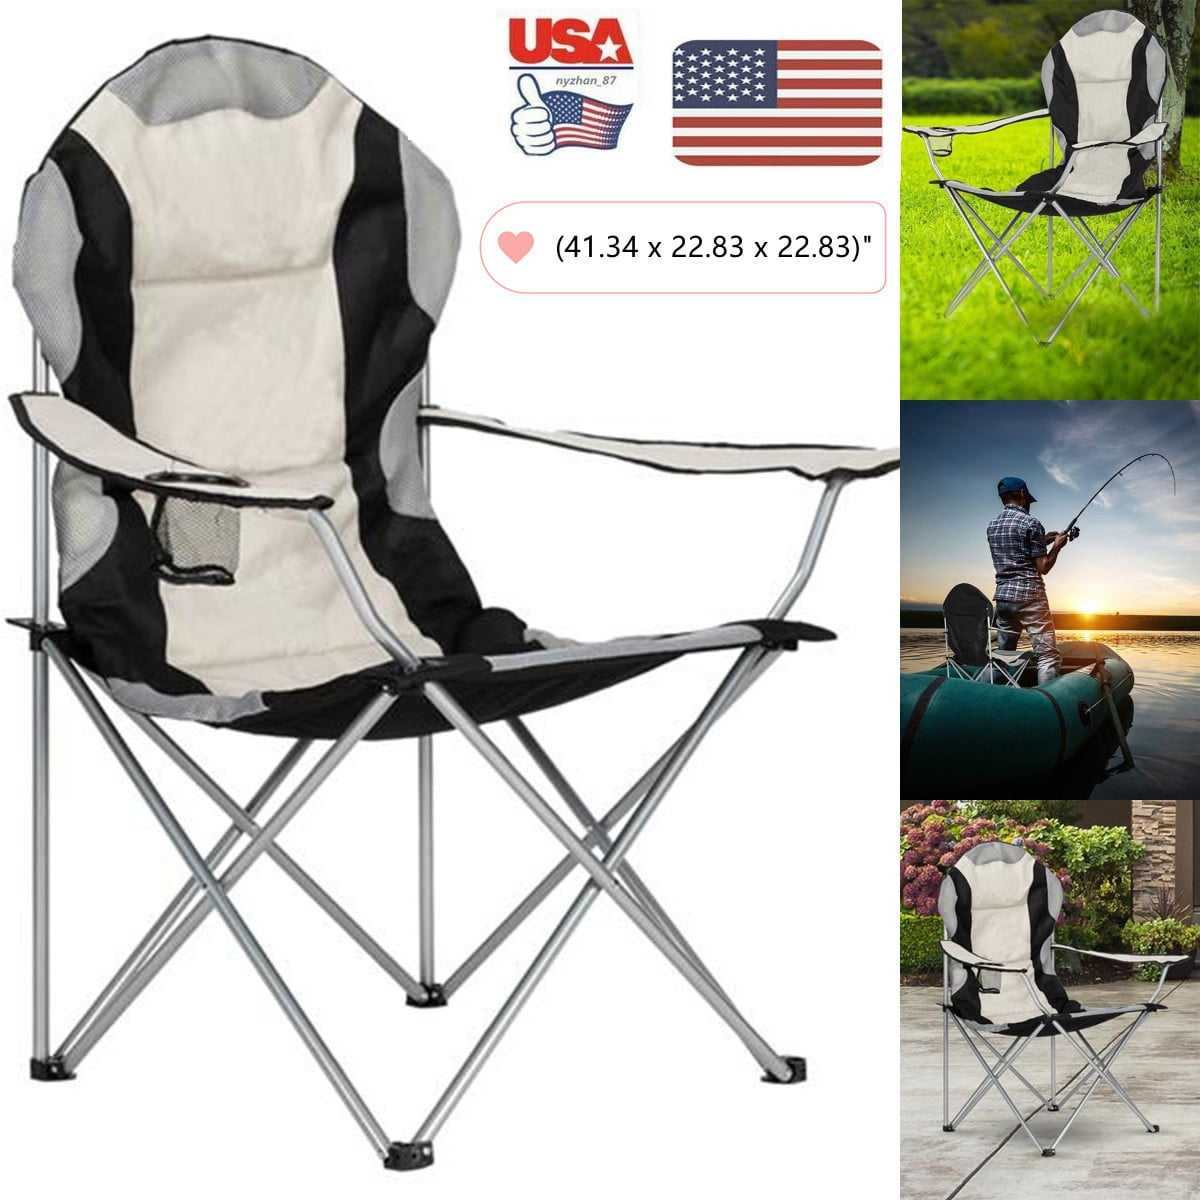 Goorabbit Fold Up Chairs For Outdoors,Medium Iron 600D Oxford Cloth Folding Camping Fishing Chair With Cup Holder and Carrying Bag Support 330lbs,Black - Walmart.com